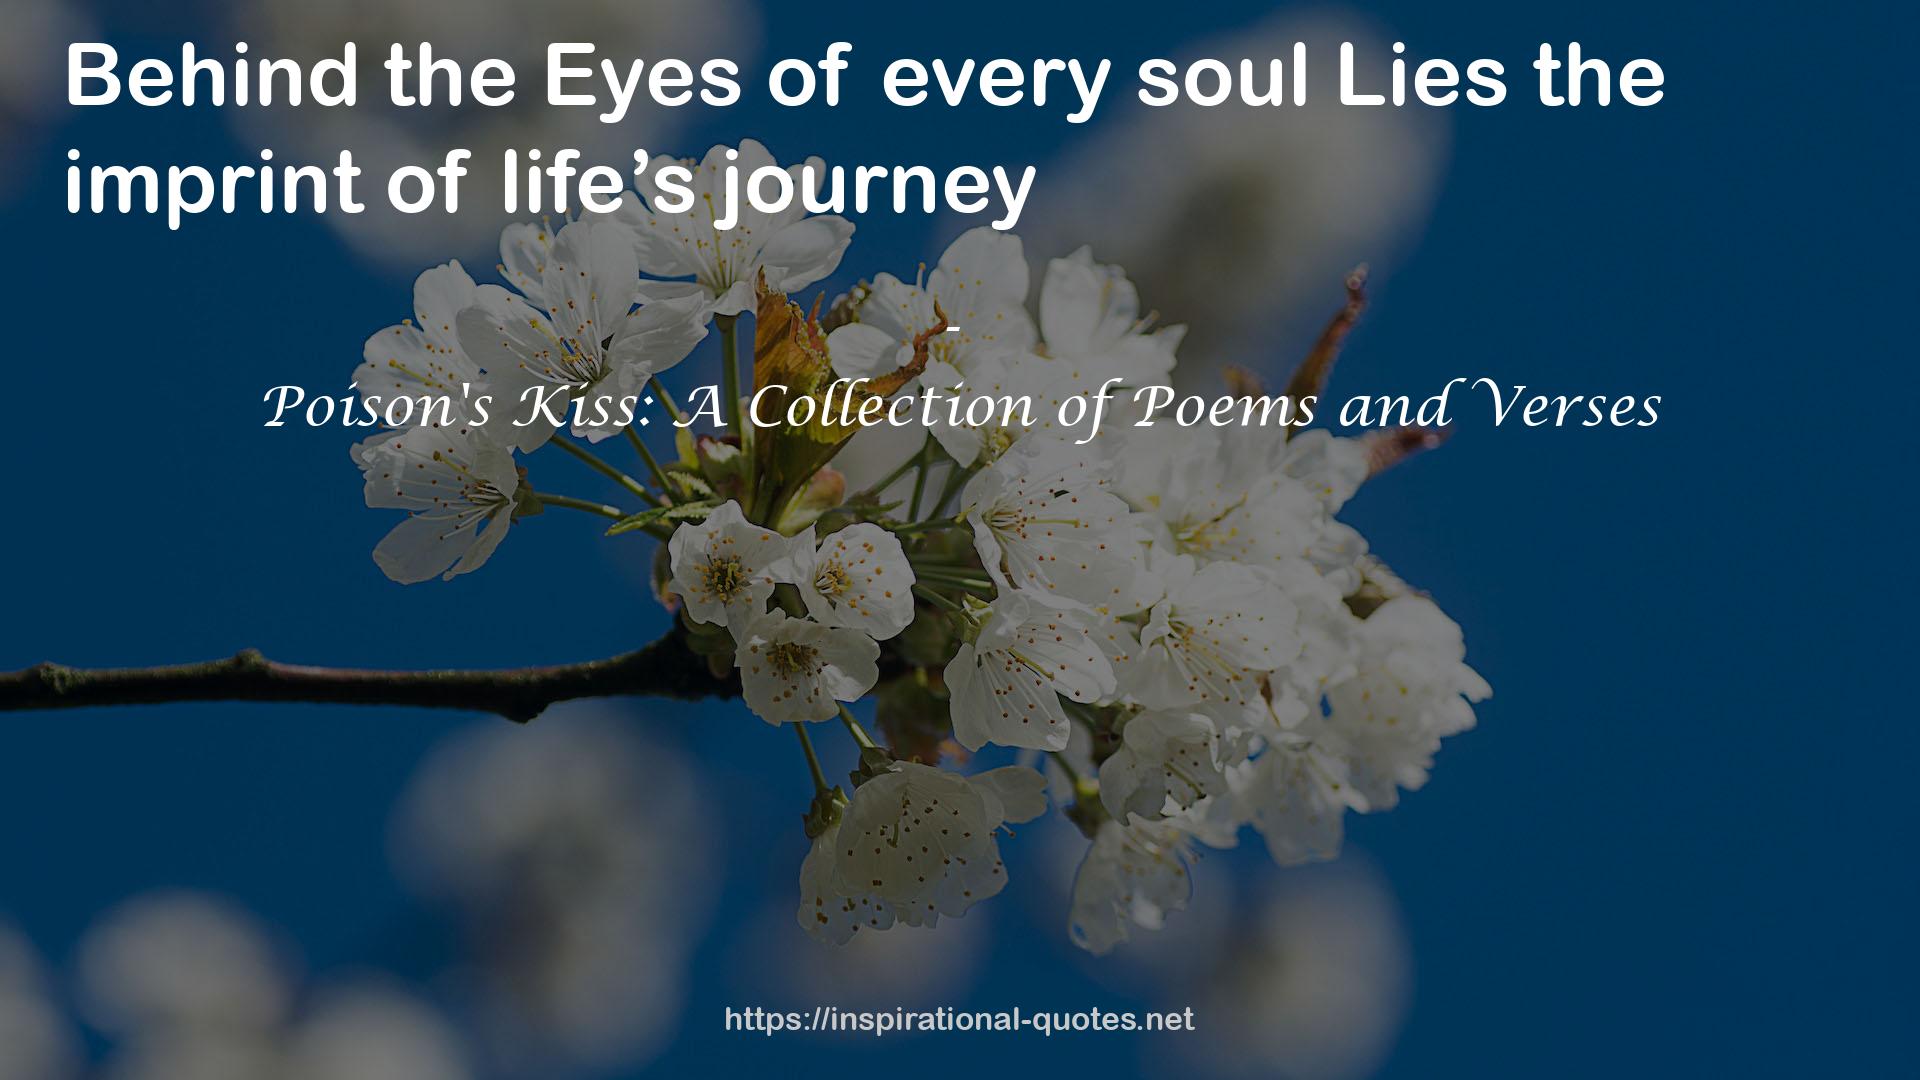 Poison's Kiss: A Collection of Poems and Verses QUOTES